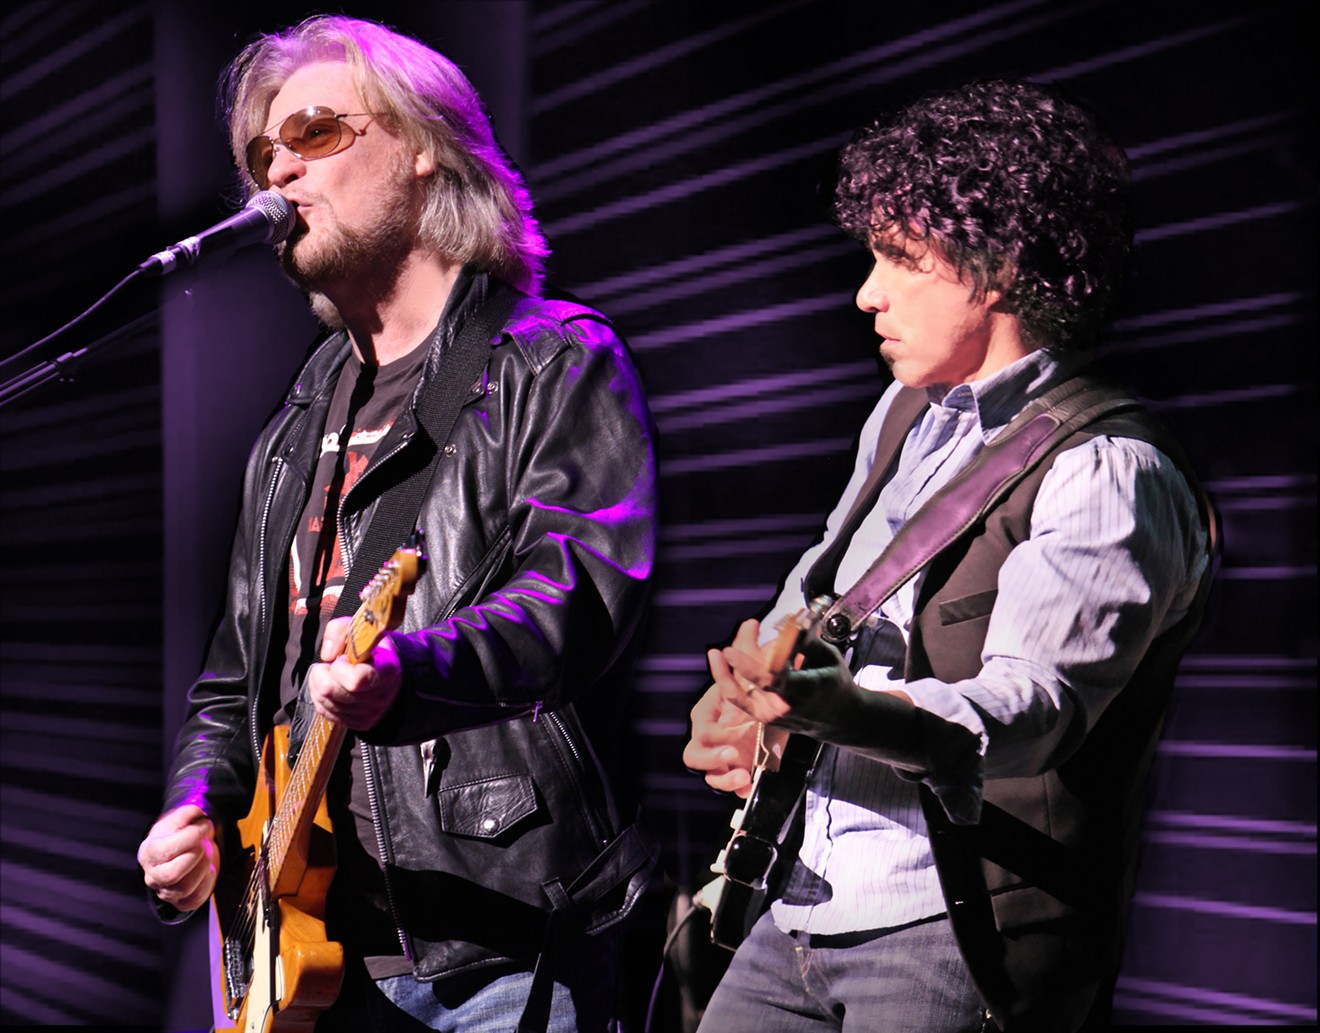 Daryl Hall and John Oates have announced a Denver concert.